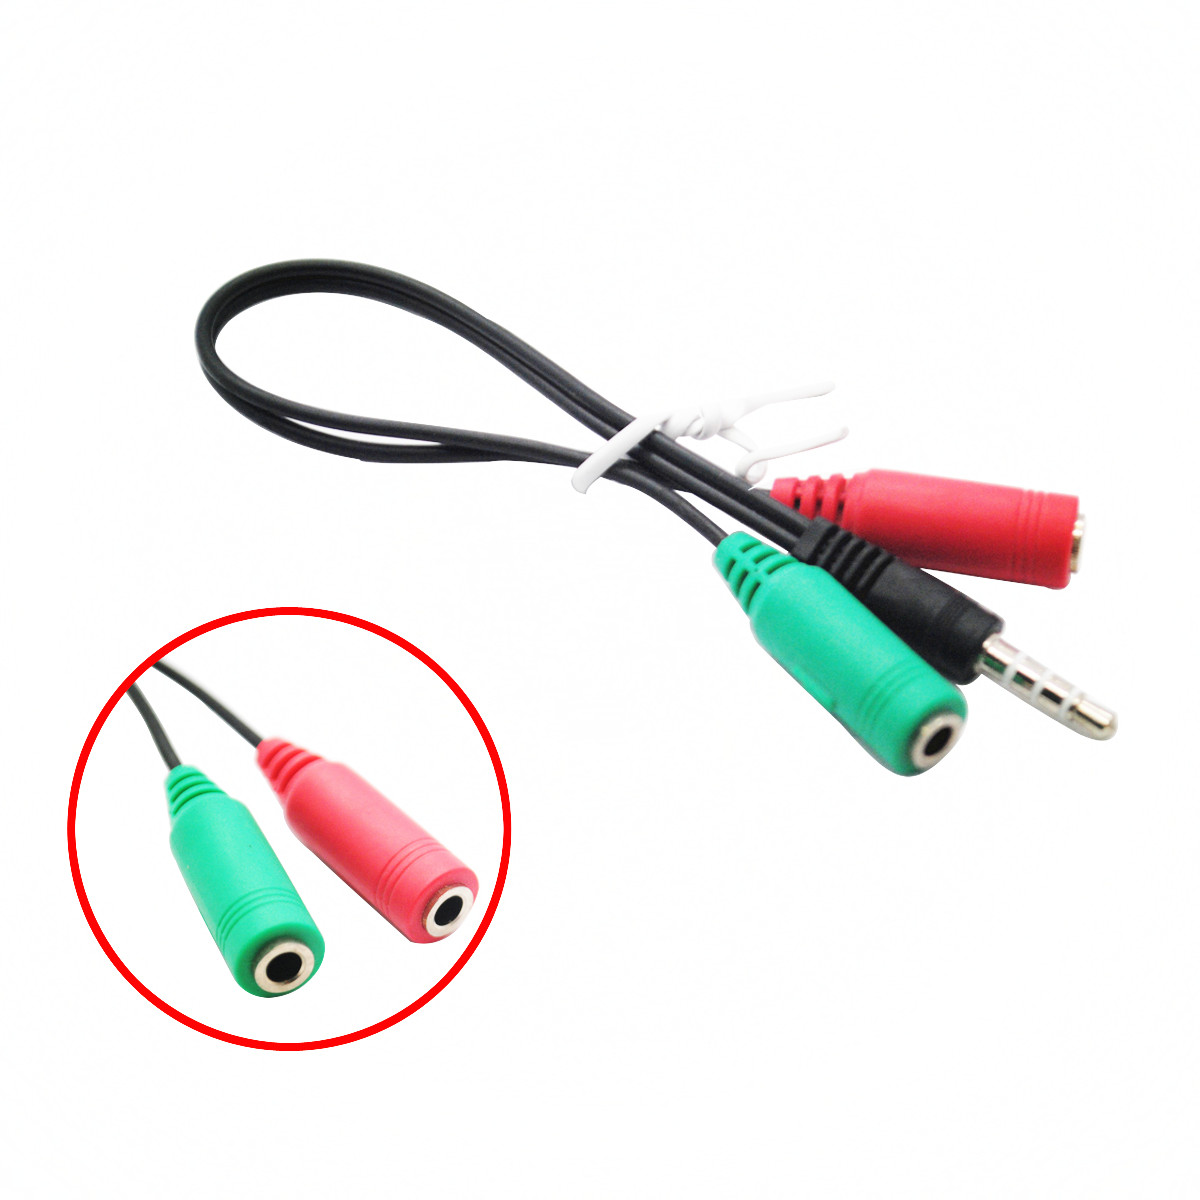 Male to 2 Female 3.5mm AUX Extension Headphone Mic Audio Splitter Cable Y Splitter Adapter for HTC One for iPod MP3